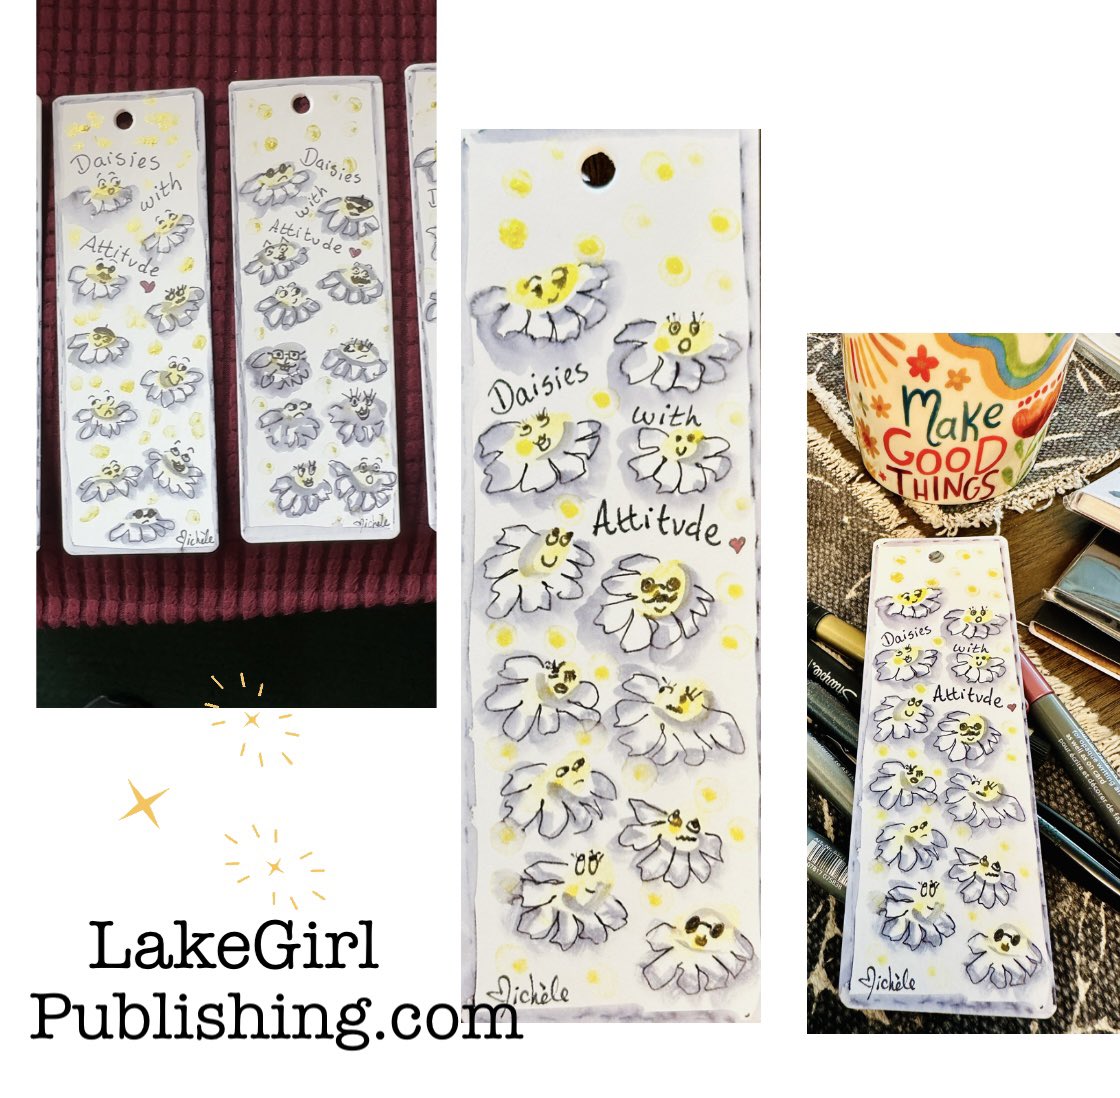 Aren’t daisies the friendliest flower Meg Ryan’s character asks in You’ve Got Mail. Obviously she never met one of these daisies with attitude-bookmarks to make you giggle. LakeGirlPublishing.com #bookmarks #daisy #daisies #You’vegotmail #beingethelauthor #writerslift #Artist